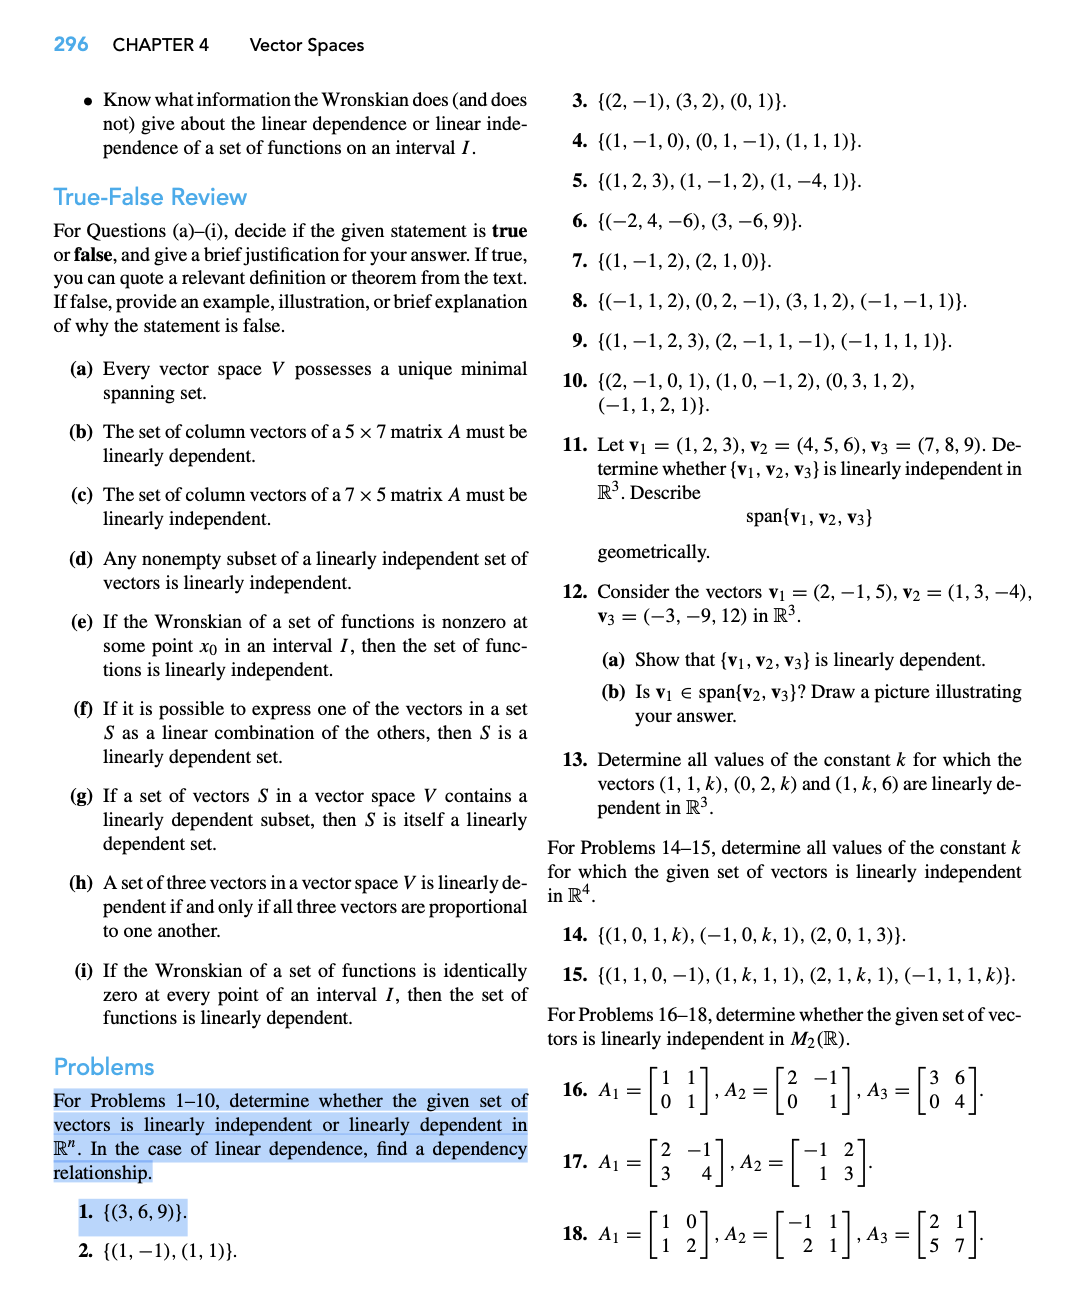 296 CHAPTER 4
Vector Spaces
• Know what information the Wronskian does (and does
not) give about the linear dependence or linear inde-
pendence of a set of functions on an interval I.
True-False Review
For Questions (a)-(i), decide if the given statement is true
or false, and give a brief justification for your answer. If true,
you can quote a relevant definition or theorem from the text.
If false, provide an example, illustration, or brief explanation
of why the statement is false.
(a) Every vector space V possesses a unique minimal
spanning set.
(b) The set of column vectors of a 5 x 7 matrix A must be
linearly dependent.
(c) The set of column vectors of a 7 x 5 matrix A must be
linearly independent.
(d) Any nonempty subset of a linearly independent set of
vectors is linearly independent.
(e) If the Wronskian of a set of functions is nonzero at
some point xo in an interval I, then the set of func-
tions is linearly independent.
(f) If it is possible to express one of the vectors in a set
S as a linear combination of the others, then S is a
linearly dependent set.
(g) If a set of vectors S in a vector space V contains a
linearly dependent subset, then S is itself a linearly
dependent set.
(h) A set of three vectors in a vector space V is linearly de-
pendent if and only if all three vectors are proportional
to one another.
(i) If the Wronskian of a set of functions is identically
zero at every point of an interval I, then the set of
functions is linearly dependent.
Problems
For Problems 1-10, determine whether the given set of
vectors is linearly independent or linearly dependent in
R". In the case of linear dependence, find a dependency
relationship.
1. {(3, 6, 9)}.
2. {(1, 1), (1, 1)}.
3. {(2, 1), (3, 2), (0, 1)).
4. {(1, 1, 0), (0, 1, −1), (1, 1, 1)}.
5. {(1, 2, 3), (1, −1, 2), (1, −4, 1)}.
6. {(2, 4, 6), (3, -6, 9)}.
7. {(1, 1, 2), (2, 1, 0)).
8. {(1, 1, 2), (0, 2, 1), (3, 1, 2), (-1,-1, 1)}.
9. {(1, 1, 2, 3), (2, −1, 1, −1), (−1, 1, 1, 1)}.
10. {(2, 1, 0, 1), (1, 0, −1, 2), (0, 3, 1, 2),
(-1, 1, 2, 1)).
11. Let v₁ = (1, 2, 3), v₂ = (4, 5, 6), V3 = (7, 8, 9). De-
termine whether {V1, V2, V3} is linearly independent in
R³. Describe
span{V1, V2, V3}
geometrically.
12. Consider the vectors v₁ = (2, -1, 5), v₂ = (1, 3, –4),
V3 = (-3, 9, 12) in R³.
(a) Show that {V₁, V2, V3} is linearly dependent.
(b) Is v₁ € span{v2, v3}? Draw a picture illustrating
your answer.
13. Determine all values of the constant k for which the
vectors (1, 1, k), (0, 2, k) and (1, k, 6) are linearly de-
pendent in R³.
For Problems 14-15, determine all values of the constant k
for which the given set of vectors is linearly independent
in R4.
14. {(1, 0, 1, k), (-1, 0, k, 1), (2, 0, 1, 3)}.
15. {(1, 1, 0, 1), (1, k, 1, 1), (2, 1, k, 1), (−1, 1, 1, k)}.
For Problems 16-18, determine whether the given set of vec-
tors is linearly independent in M₂ (R).
- [6₂1]^² - [6 ]-^² - [84]
,
-
, A3 =
01
16. A₁ =
- [34]^2-[13]
=
17. A₁ =
- [12]·^² = [ 2² ]-^² = [3₂²]
, A₂
, A3
18. A₁ =